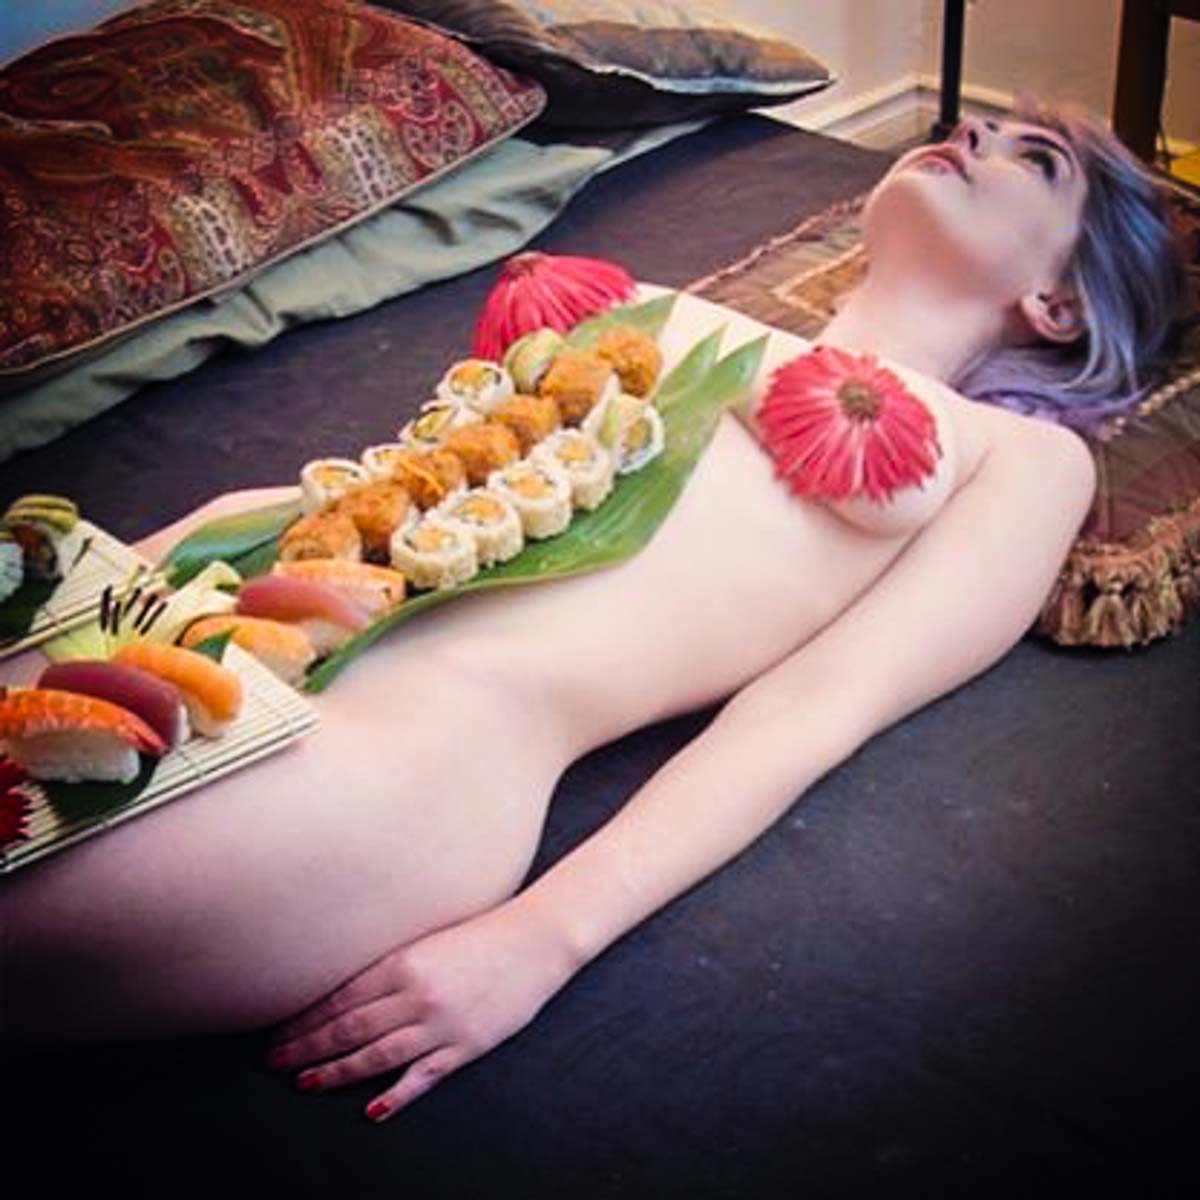 arzu huseynova recommends naked women with food pic